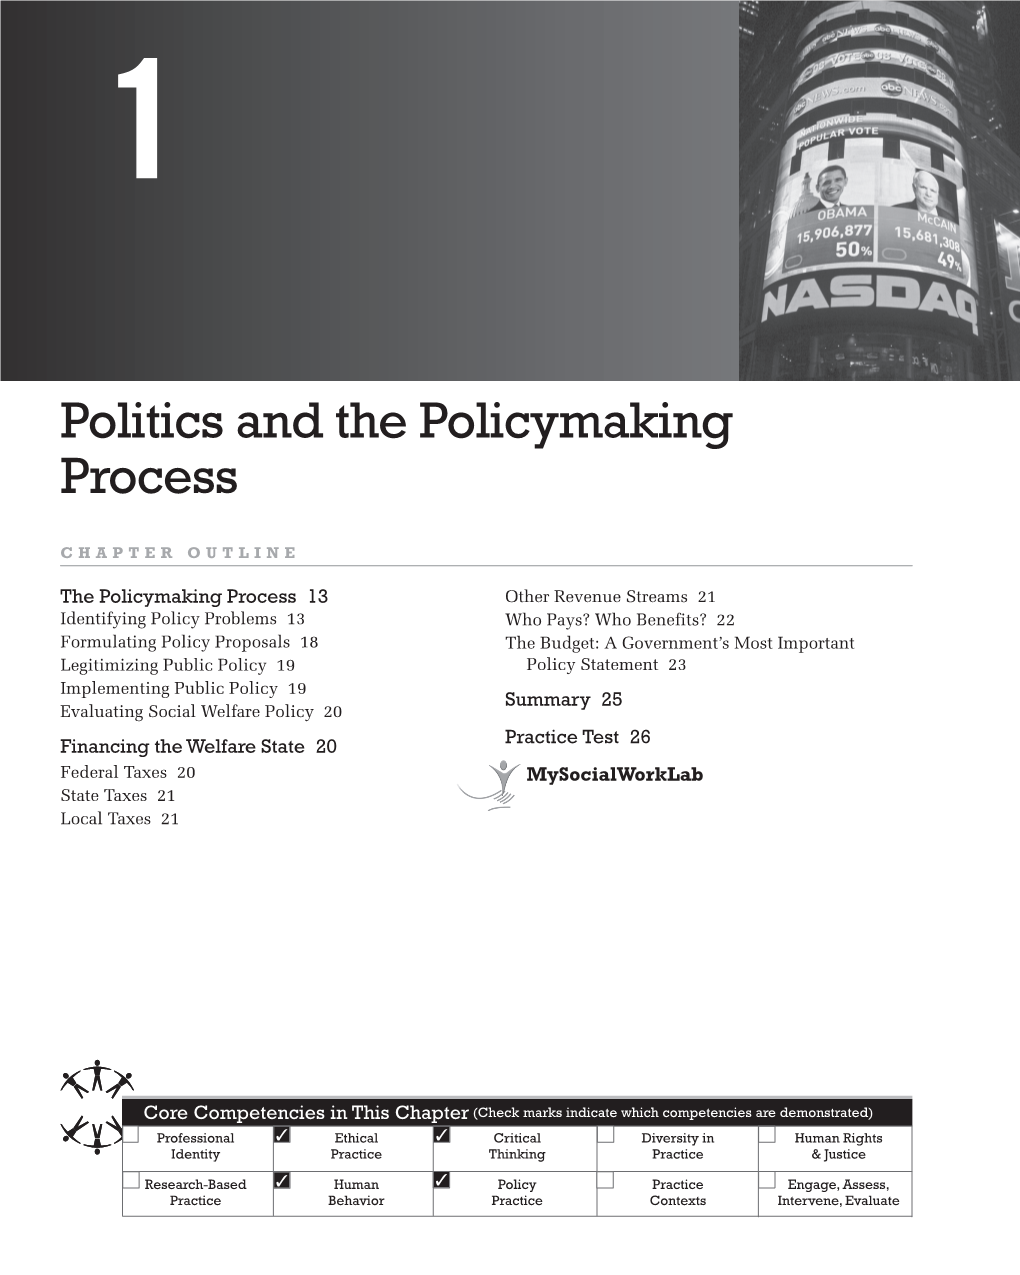 Politics and the Policymaking Process